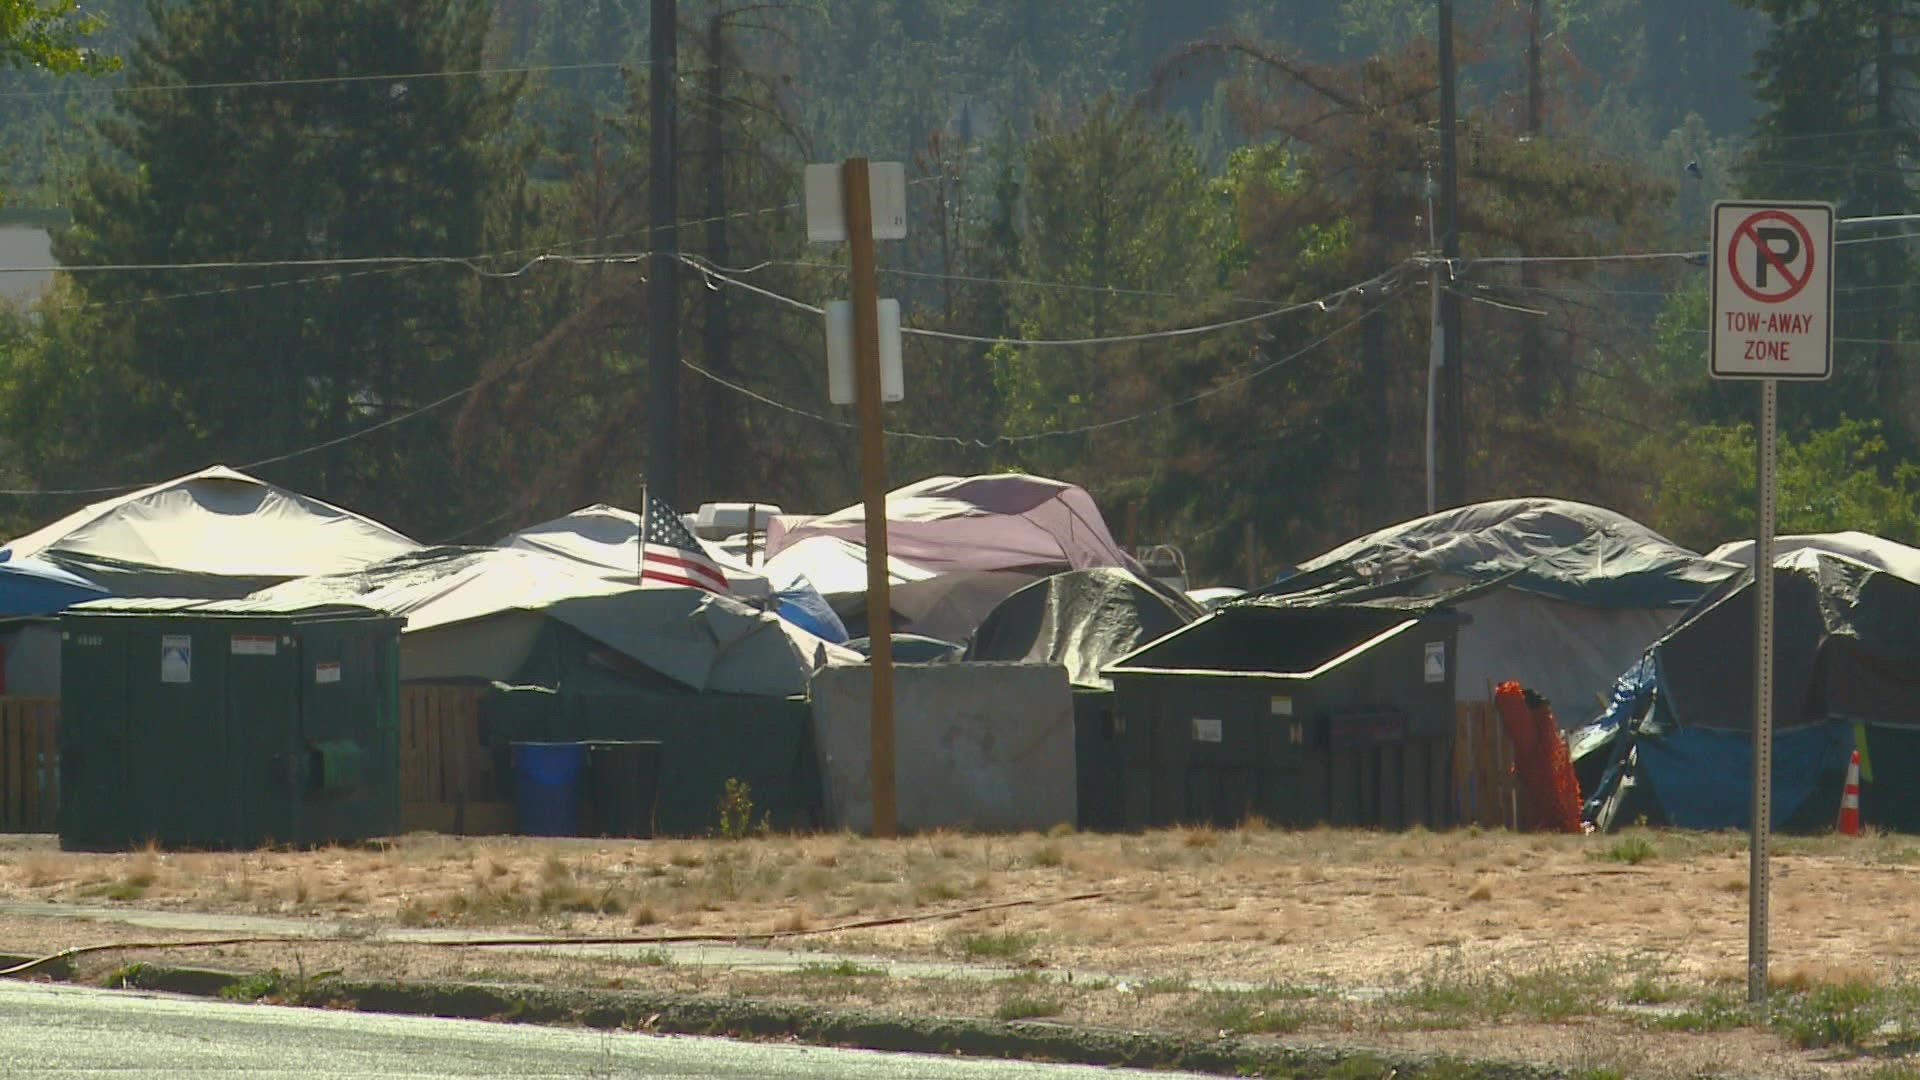 Neighbors living close to the area where the homeless camp near I-90 is located said they have been living with increased crime and noise for months.